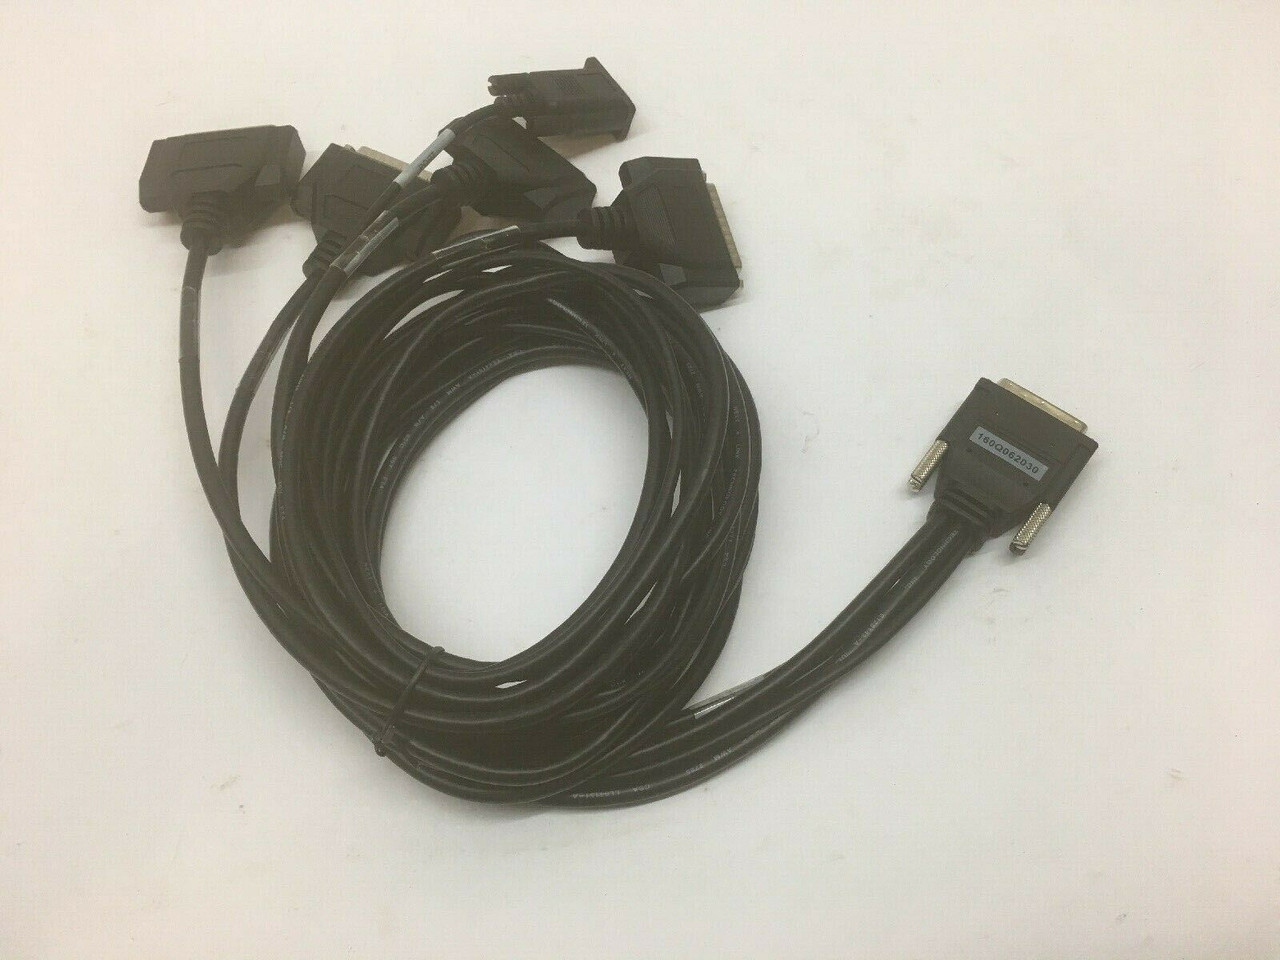 4x RS232 Hydra Cable 160Q0620 SunHillo DTE With Console